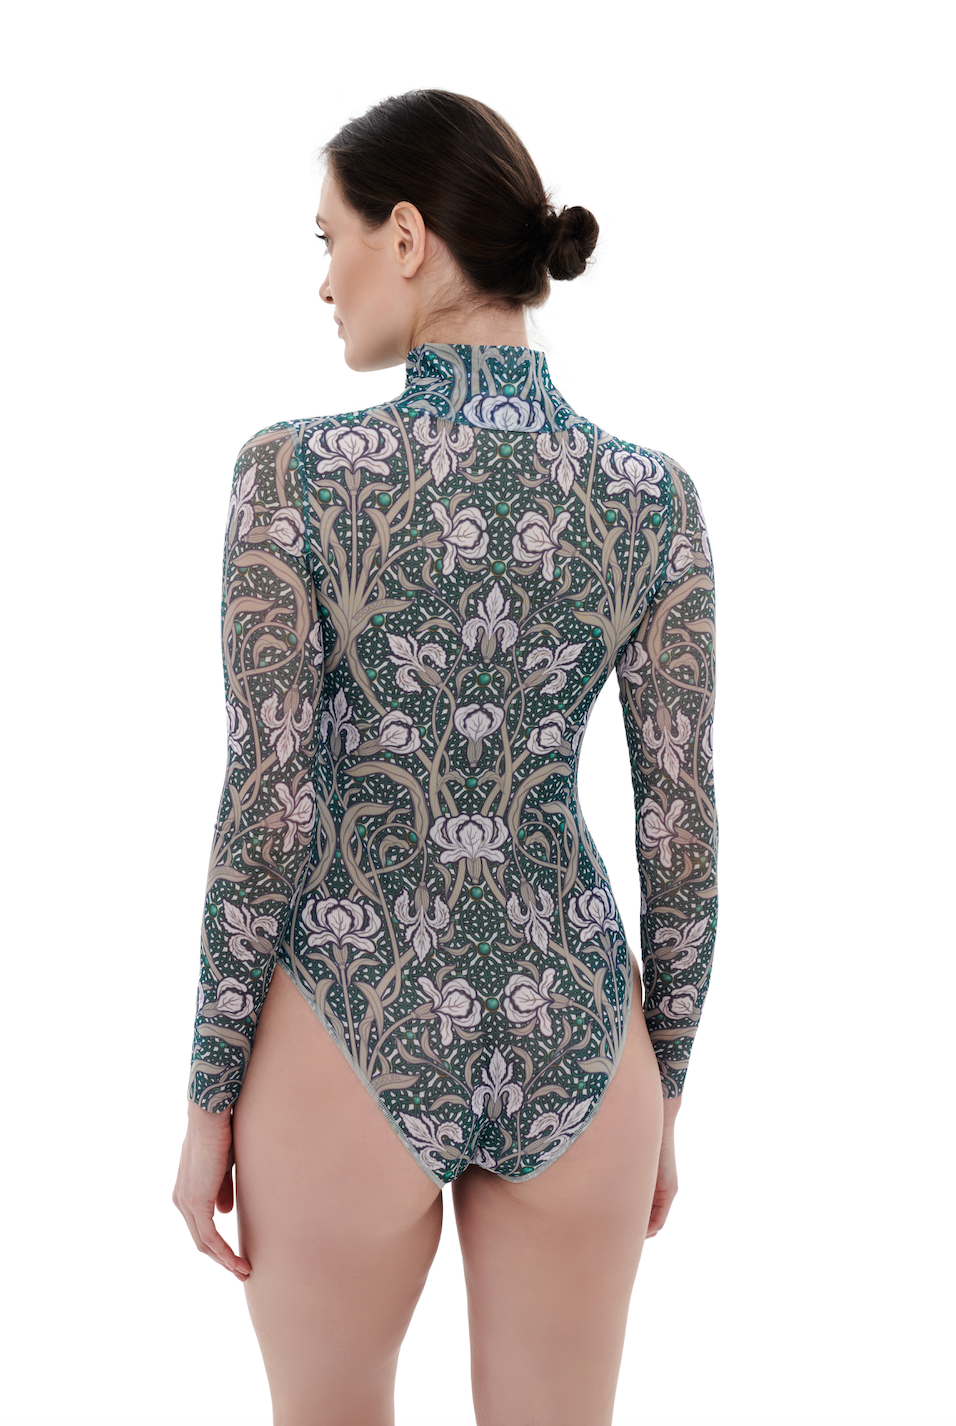 This file provides a meta description for the Iriss print swimsuit, featuring sleeves, a zipper, and SPF35 protection, catering to those seeking classic luxury and sustainable smart fashion choices.